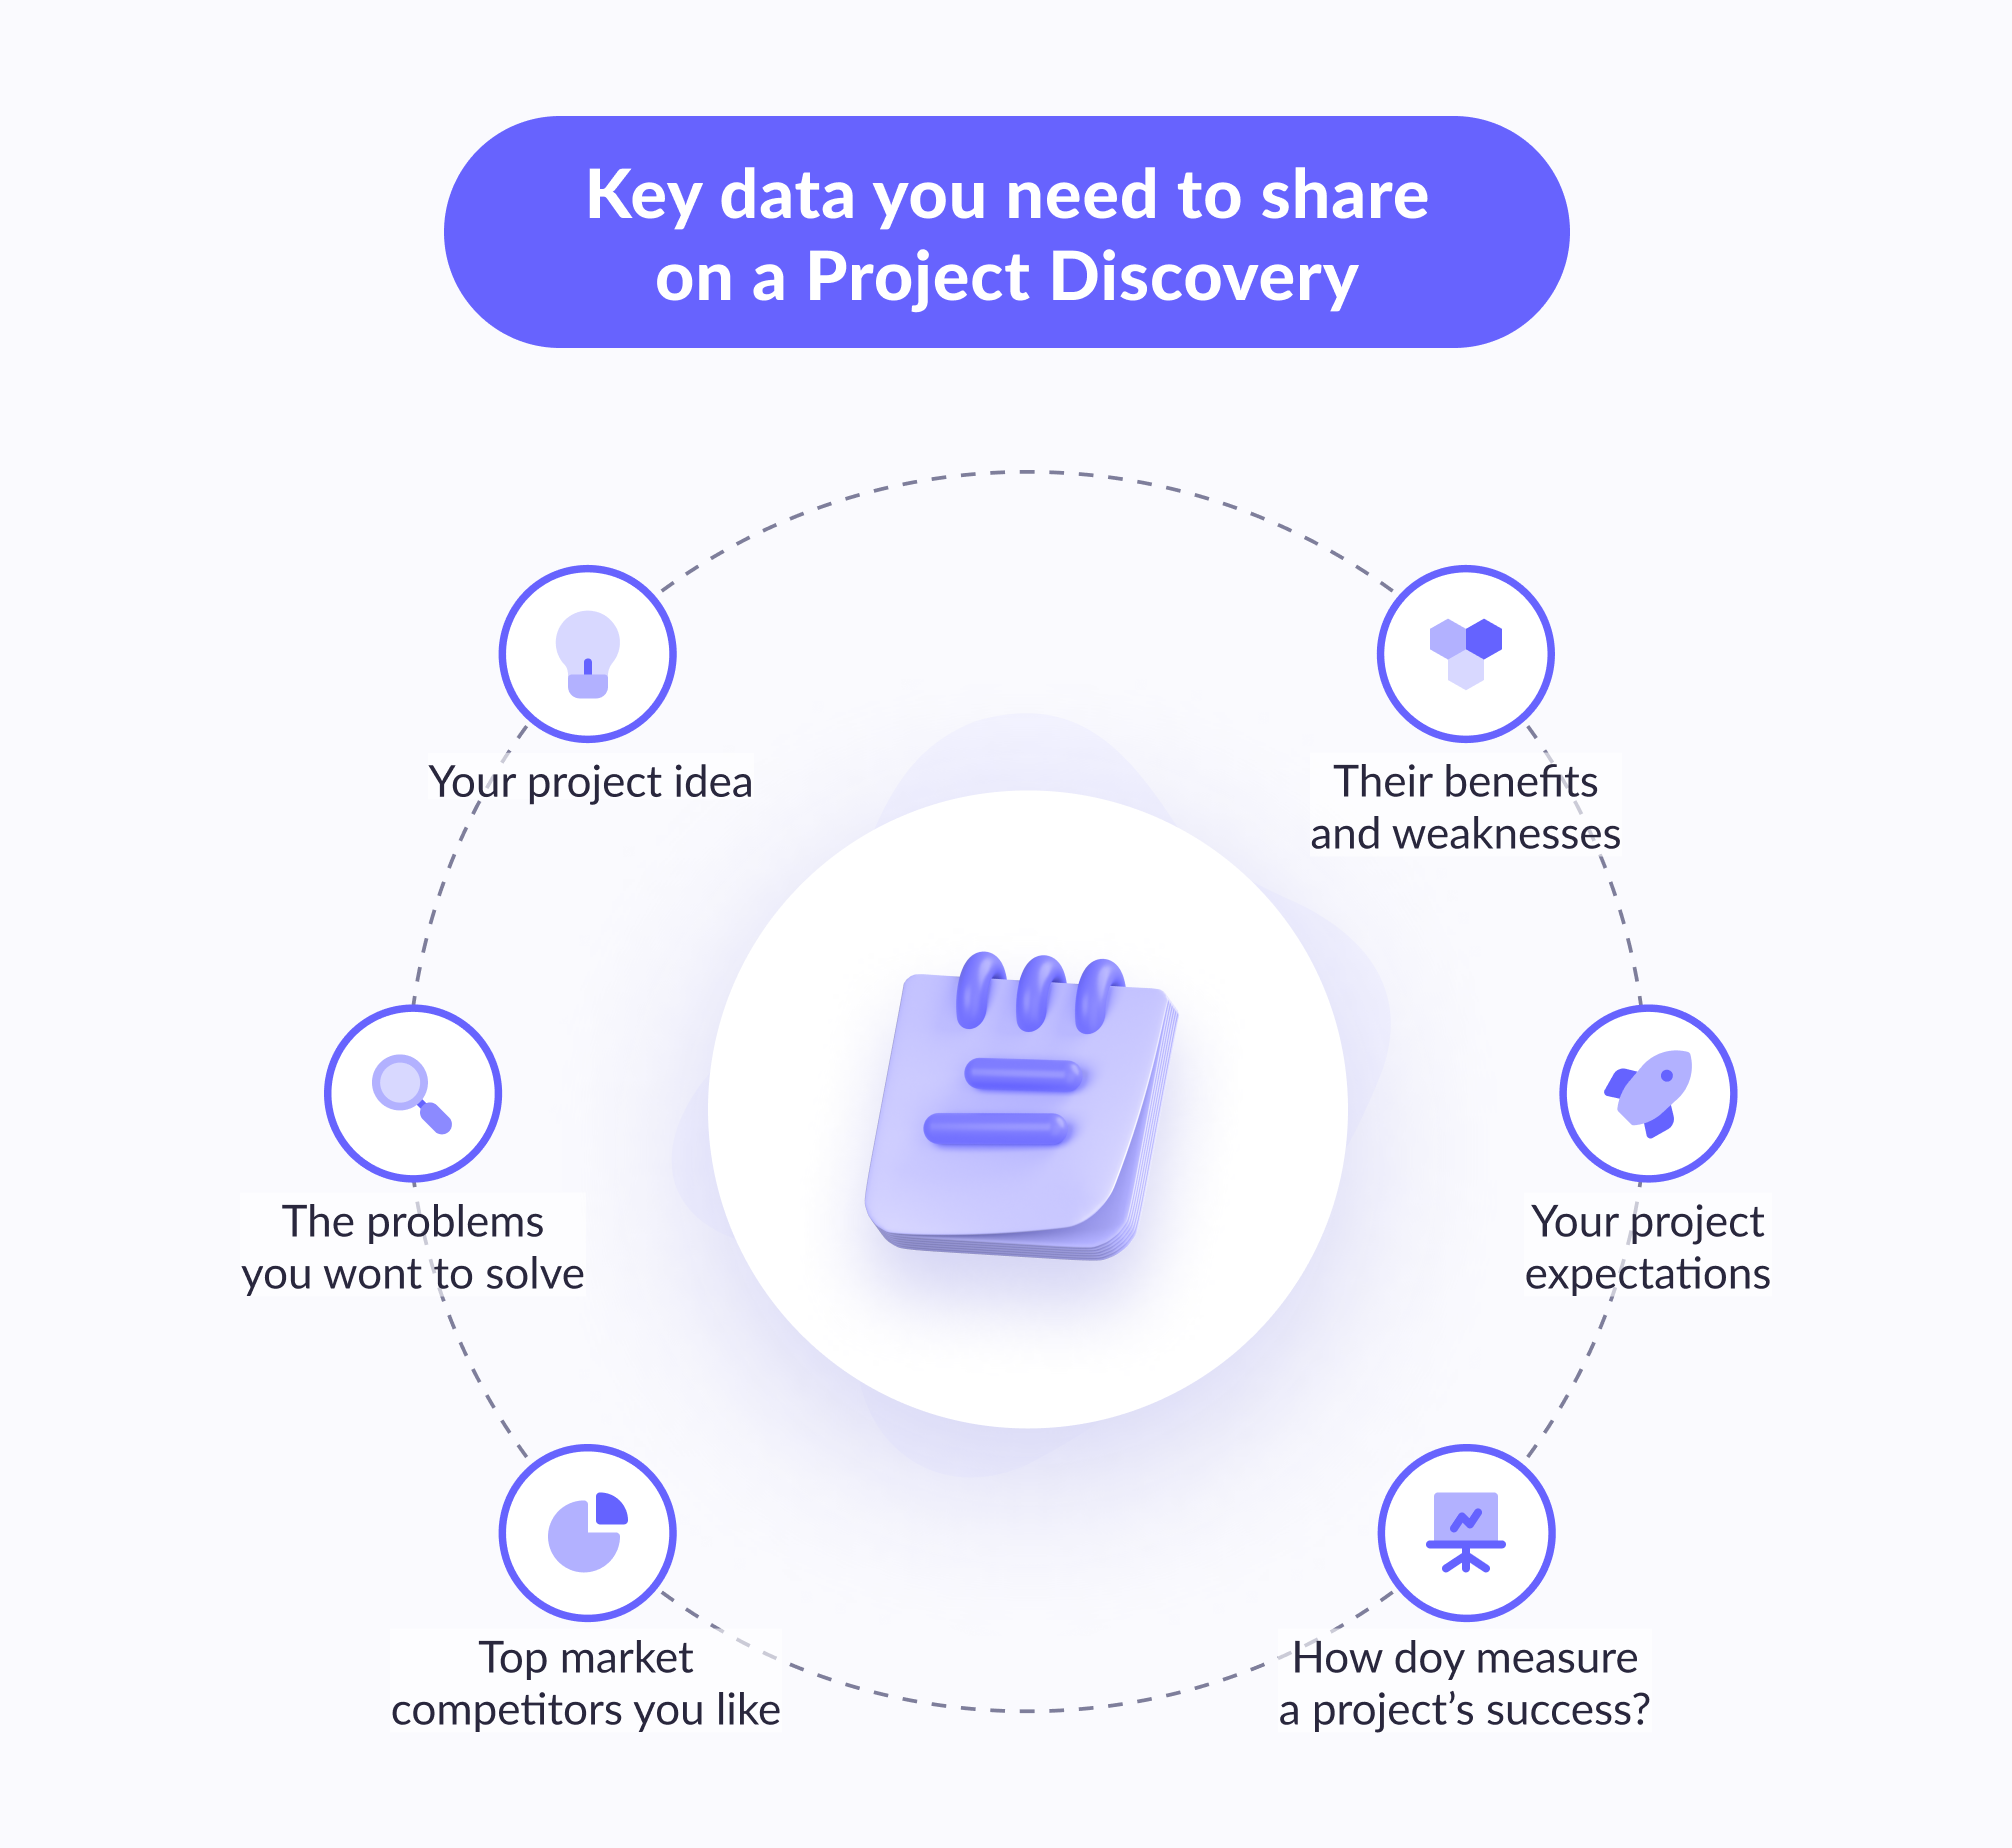 Key data you need to share on a Project Discovery